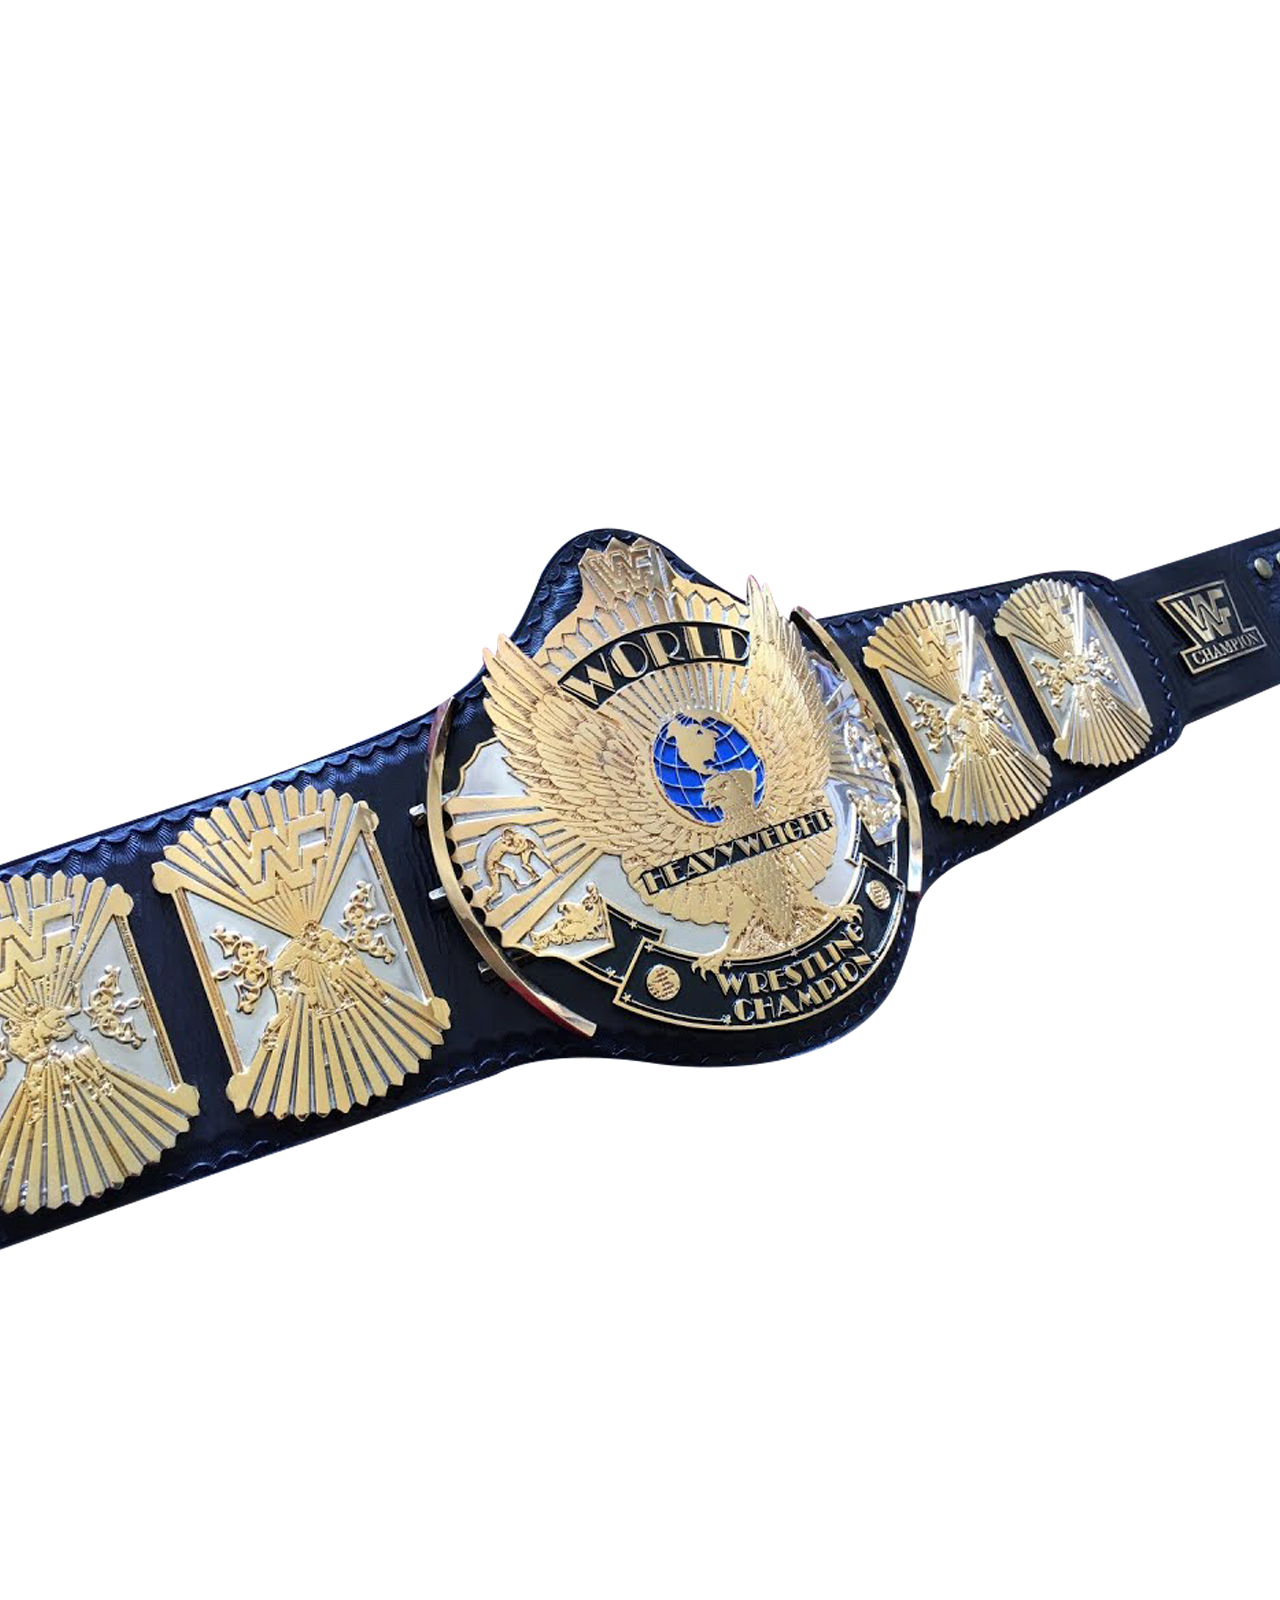 Winged Eagle Dual Plated Championship Wrestling Belt Aspire Leather